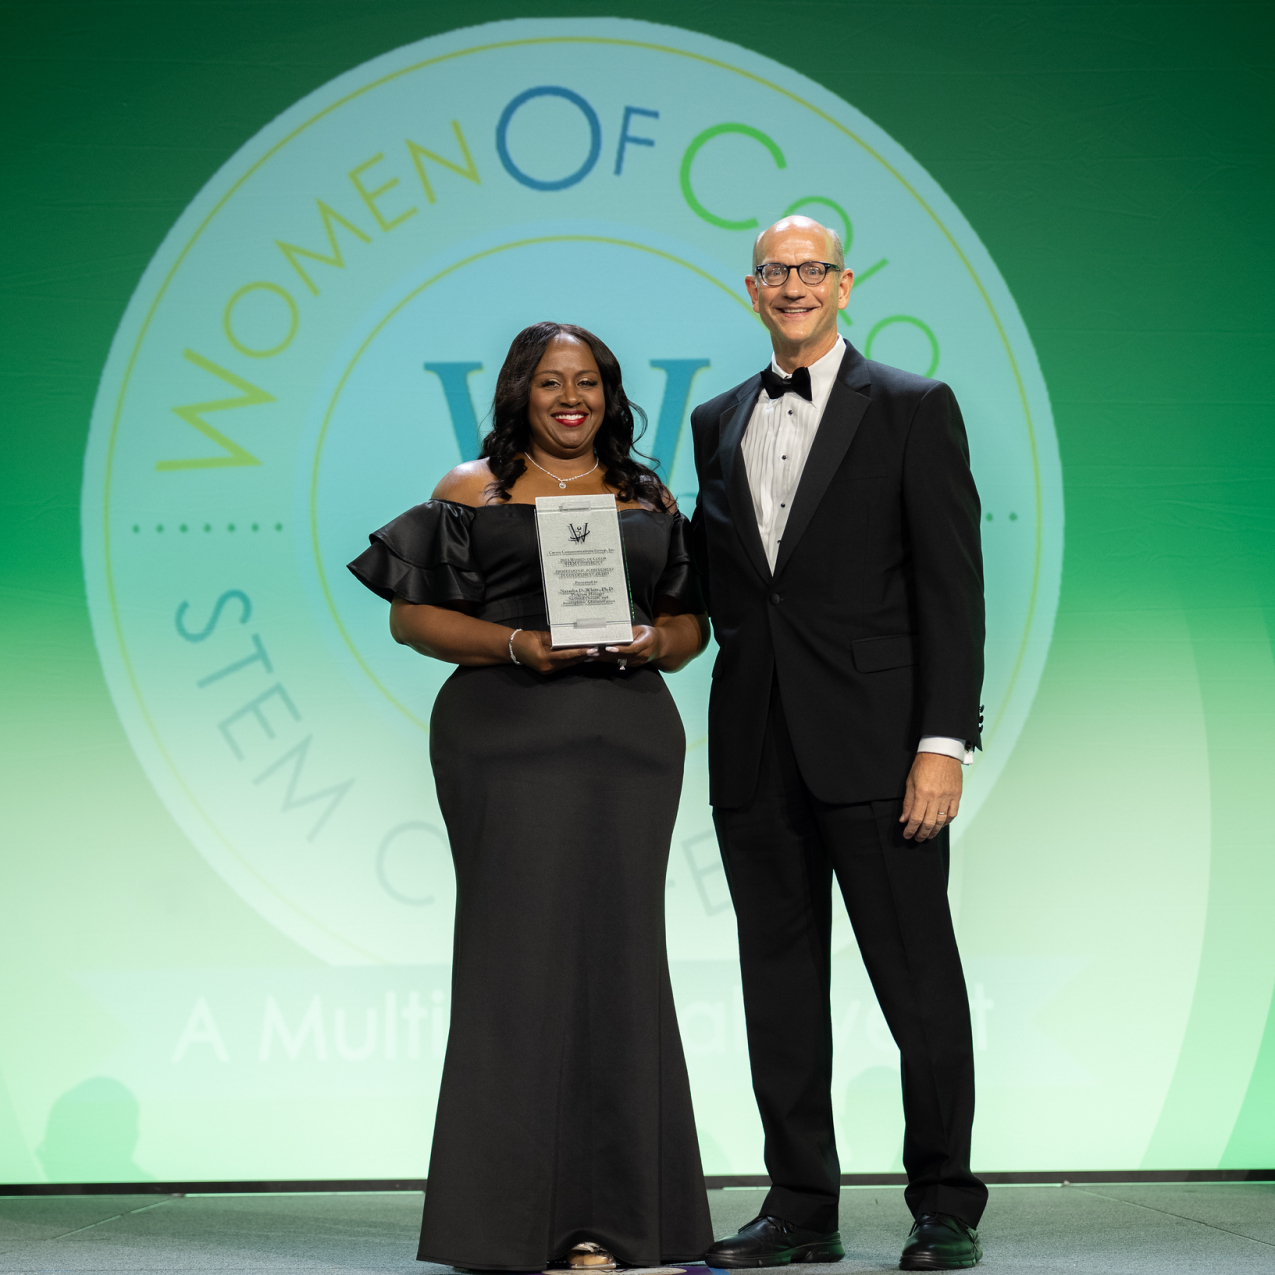 Natasha and the conference host, Eric S. Musser, stand side-by-side in black-tie attire as Natasha accepts a placard as her award. They stand in front of a screen that is projecting the Women of Color in STEM logo.